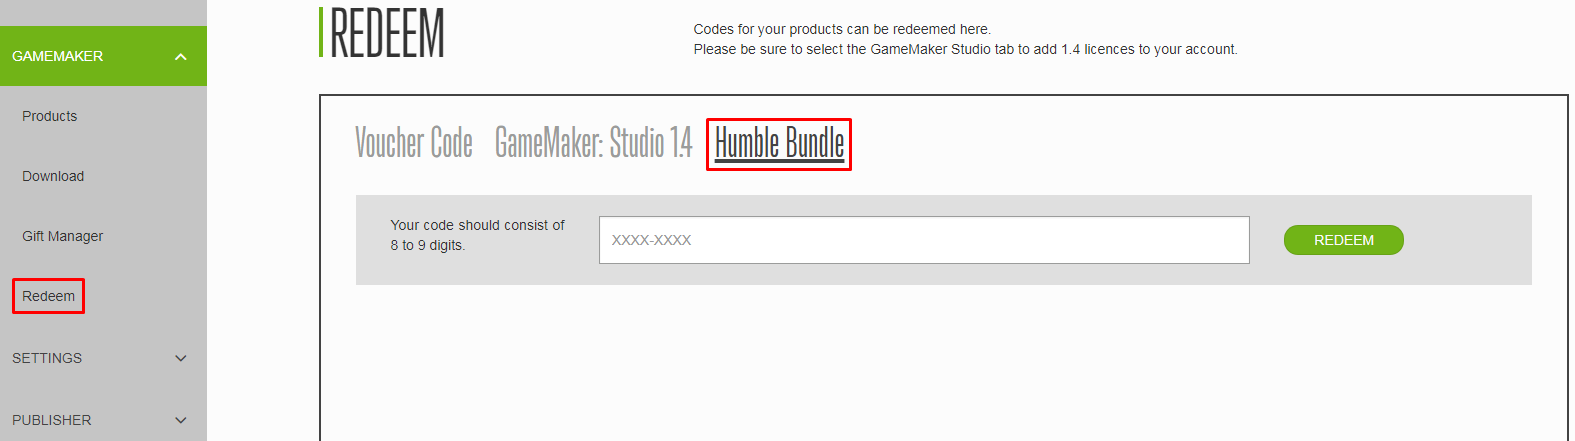 Free Game Redemption Instructions – Humble Bundle